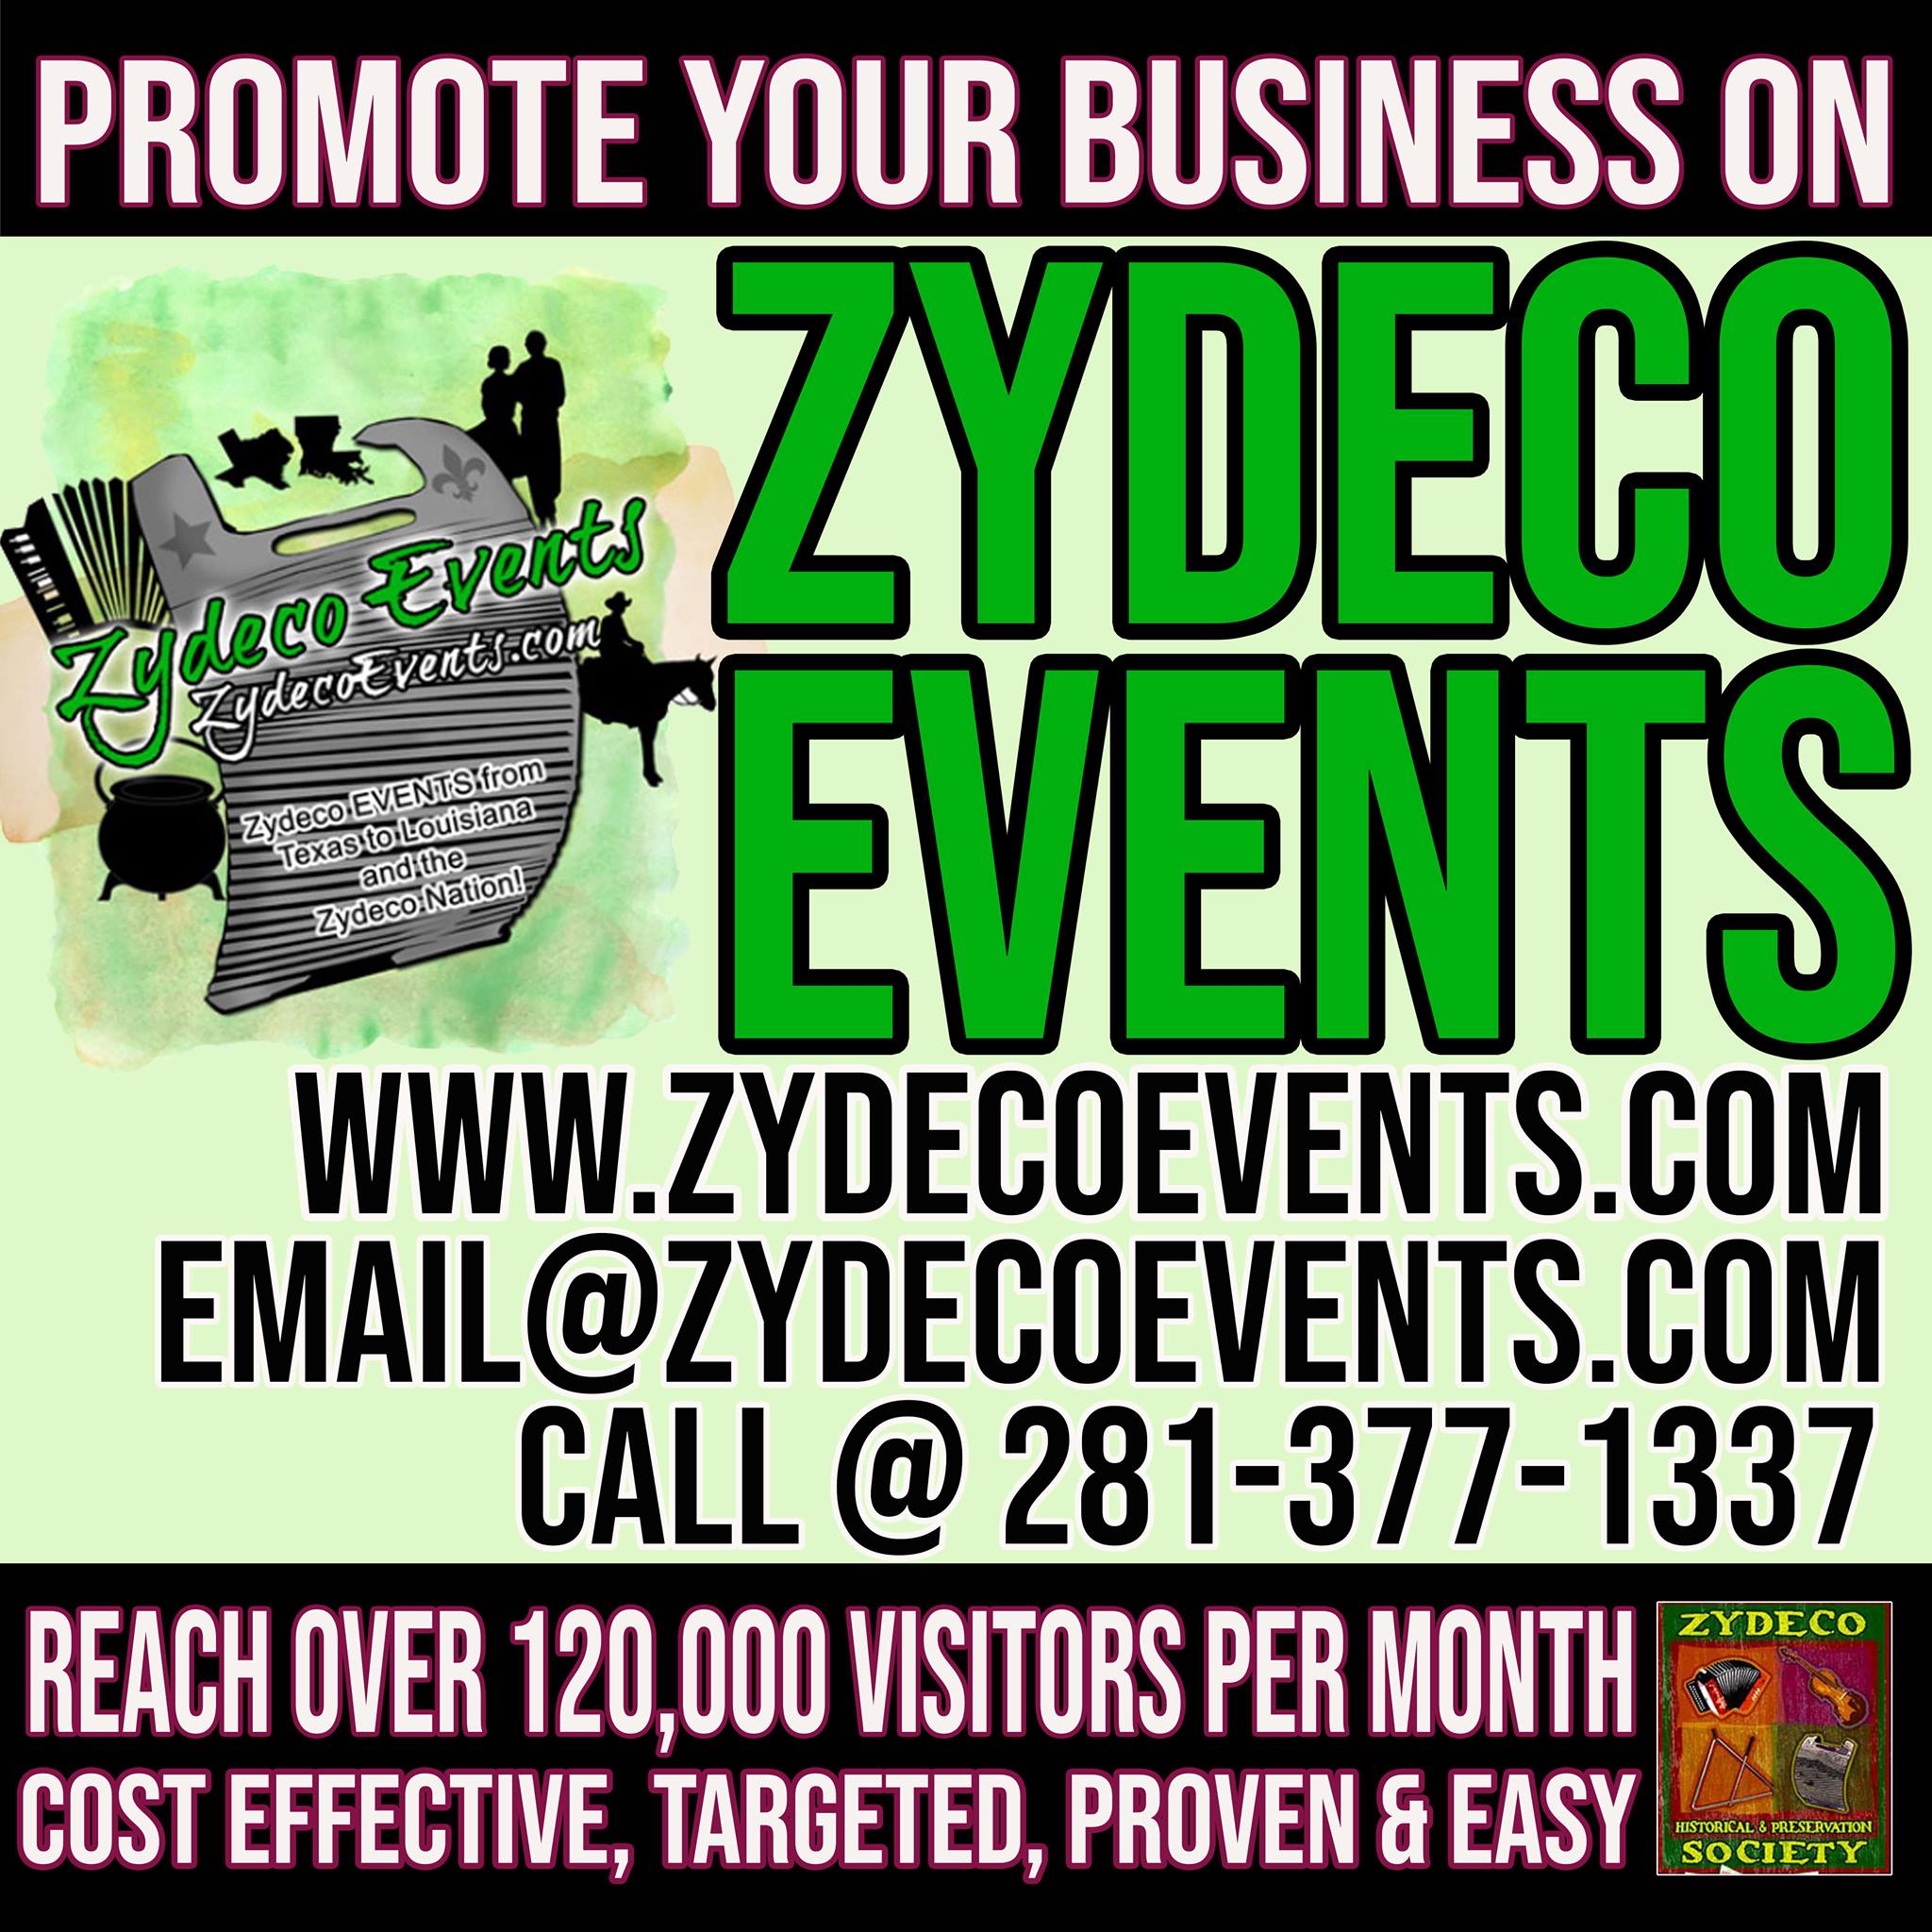 ZydecoEvents - PROMOTE YOUR BUSINESS